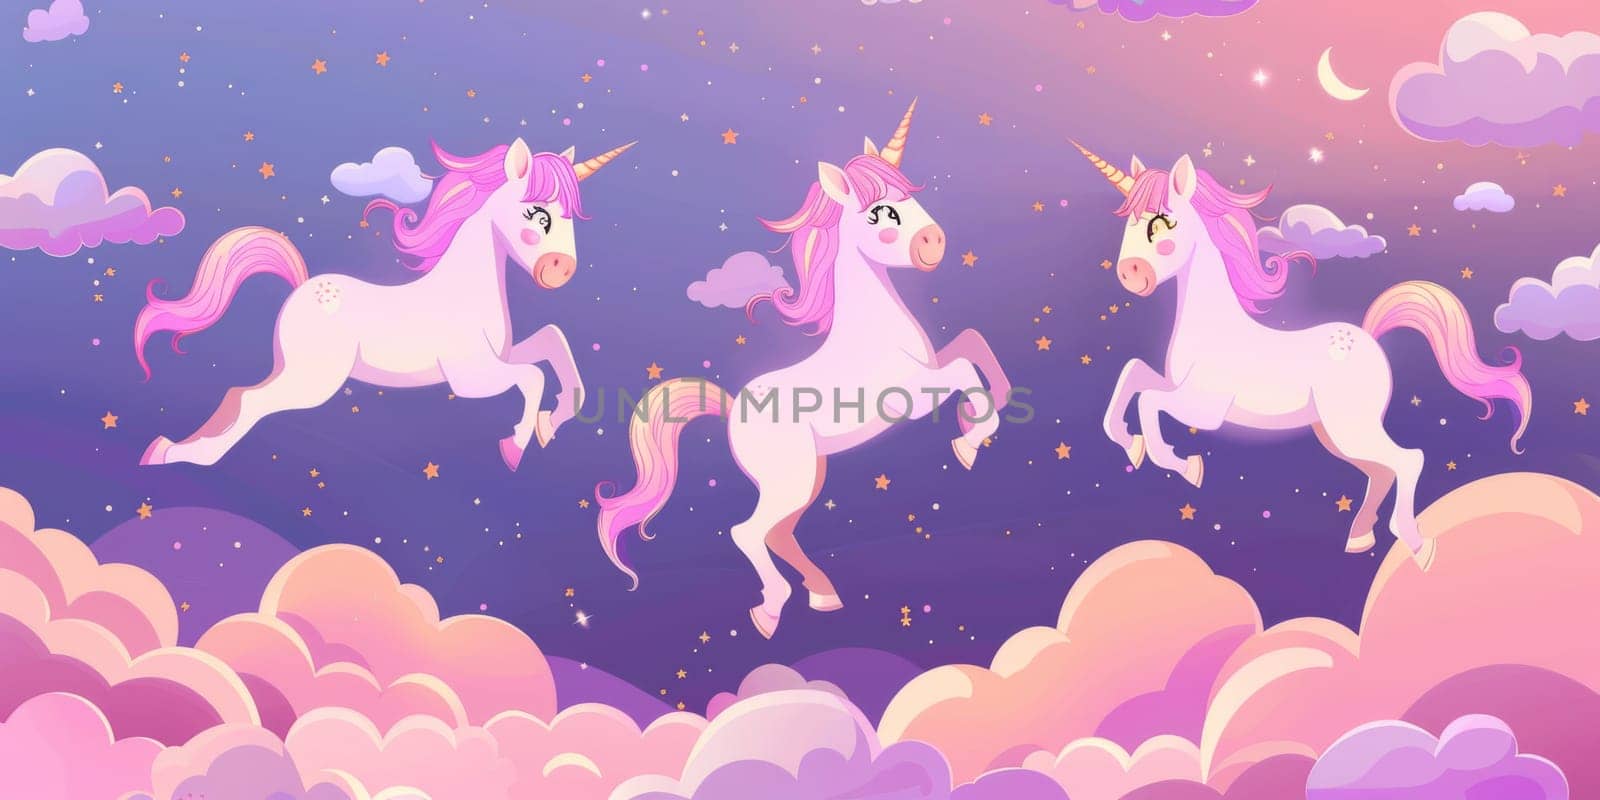 Three pink unicorns jumping on a pink and purple clouds in the sky